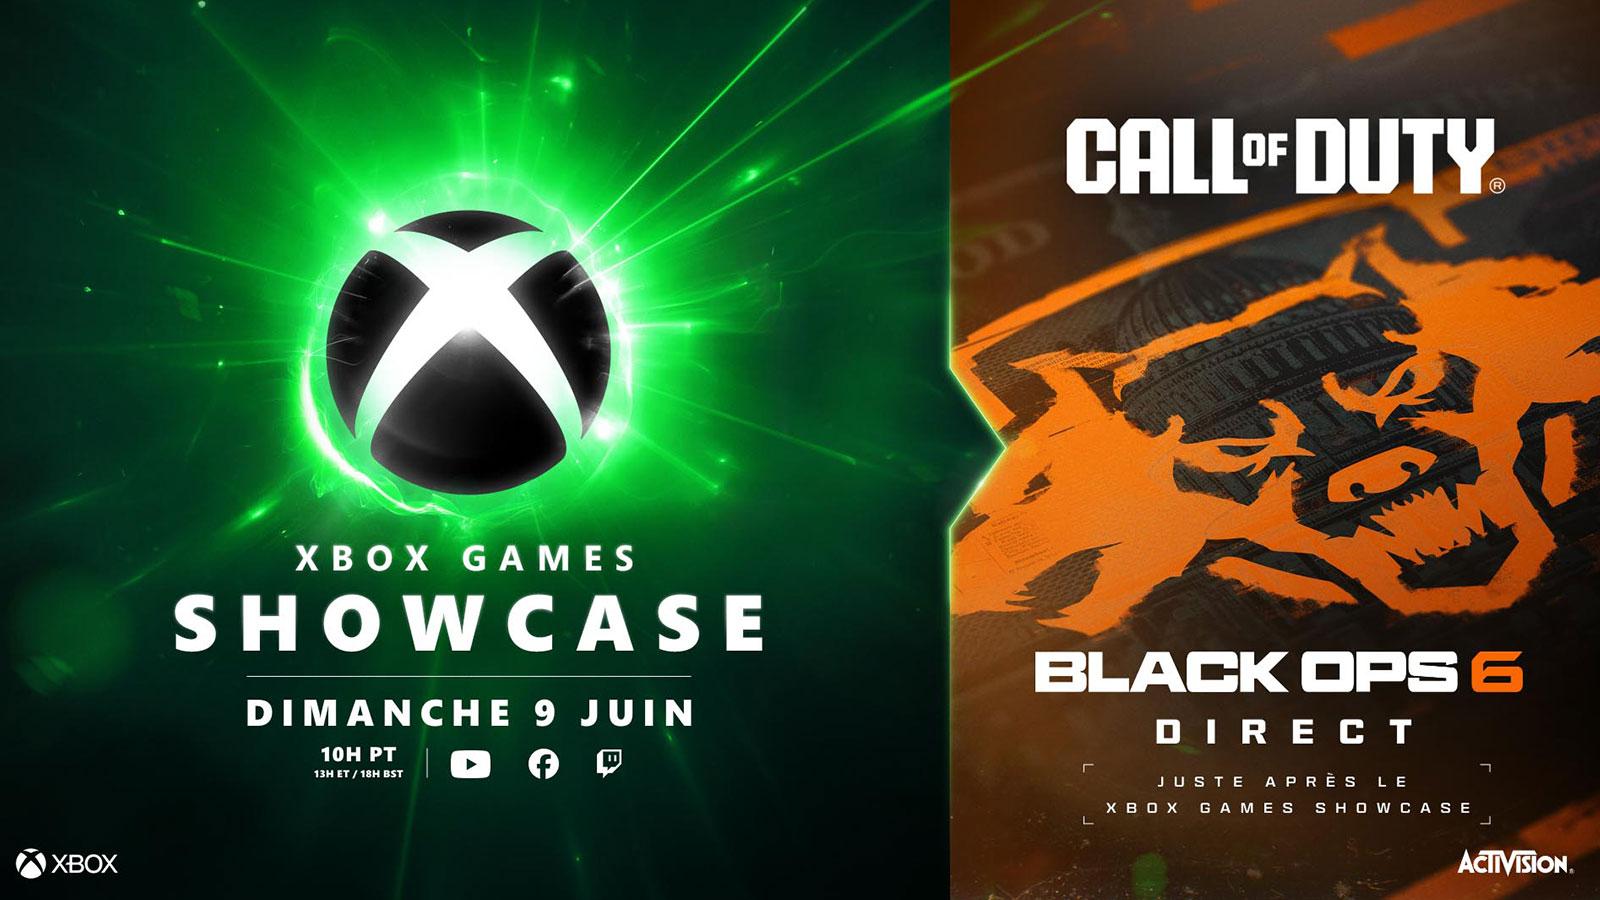 Xbox Games Showcase et Call of Duty Black Ops 6 Direct